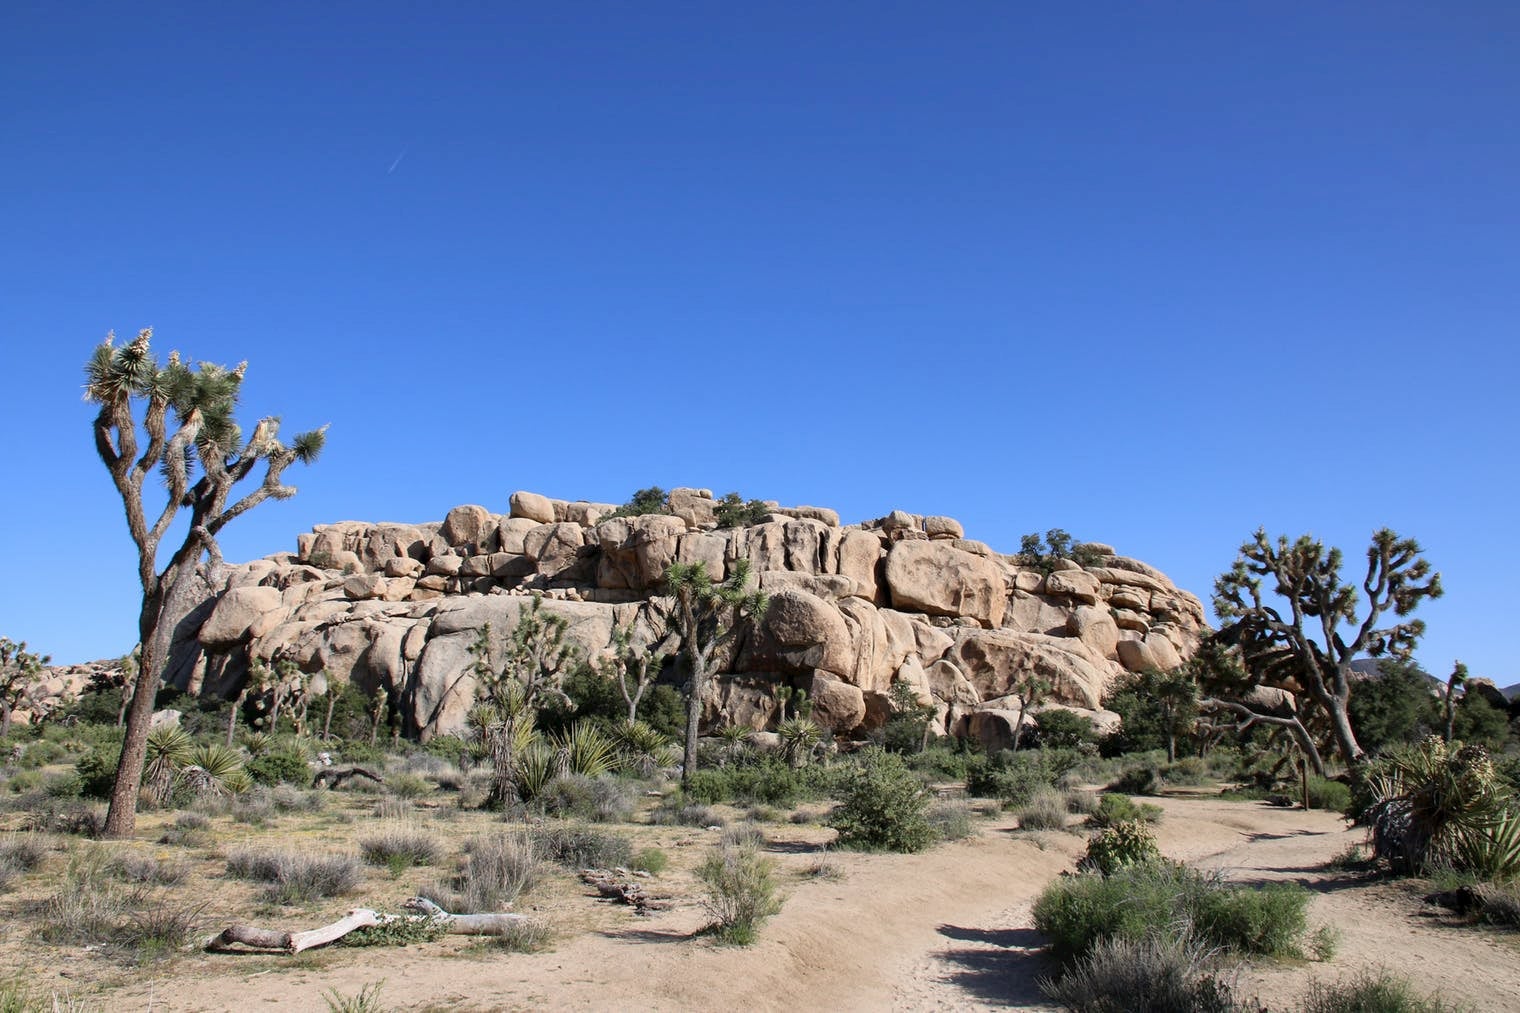 Desert landscape with brush in the foreground and boulders in the background.